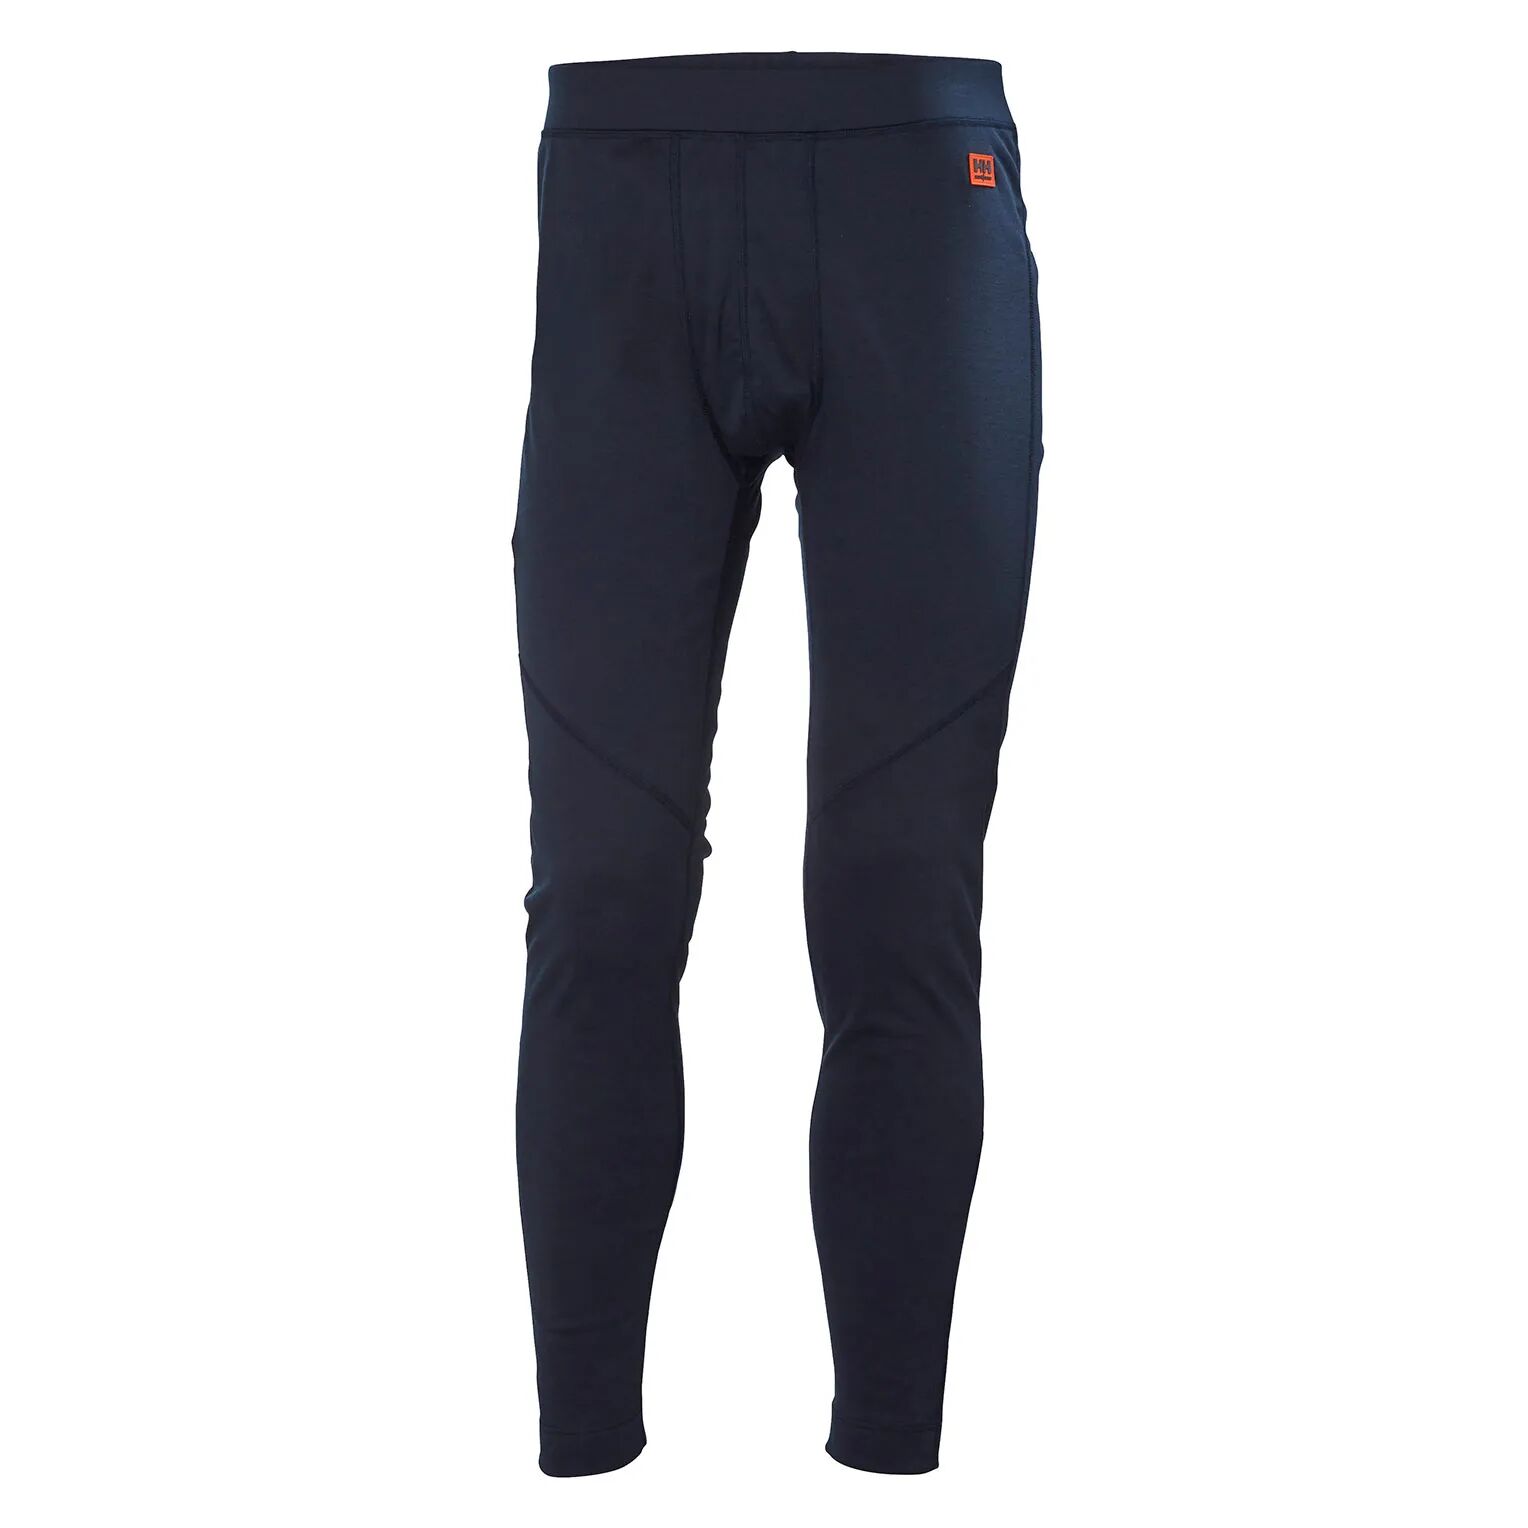 HH Workwear Helly Hansen WorkwearHH Lifa Max Pant Navy XS